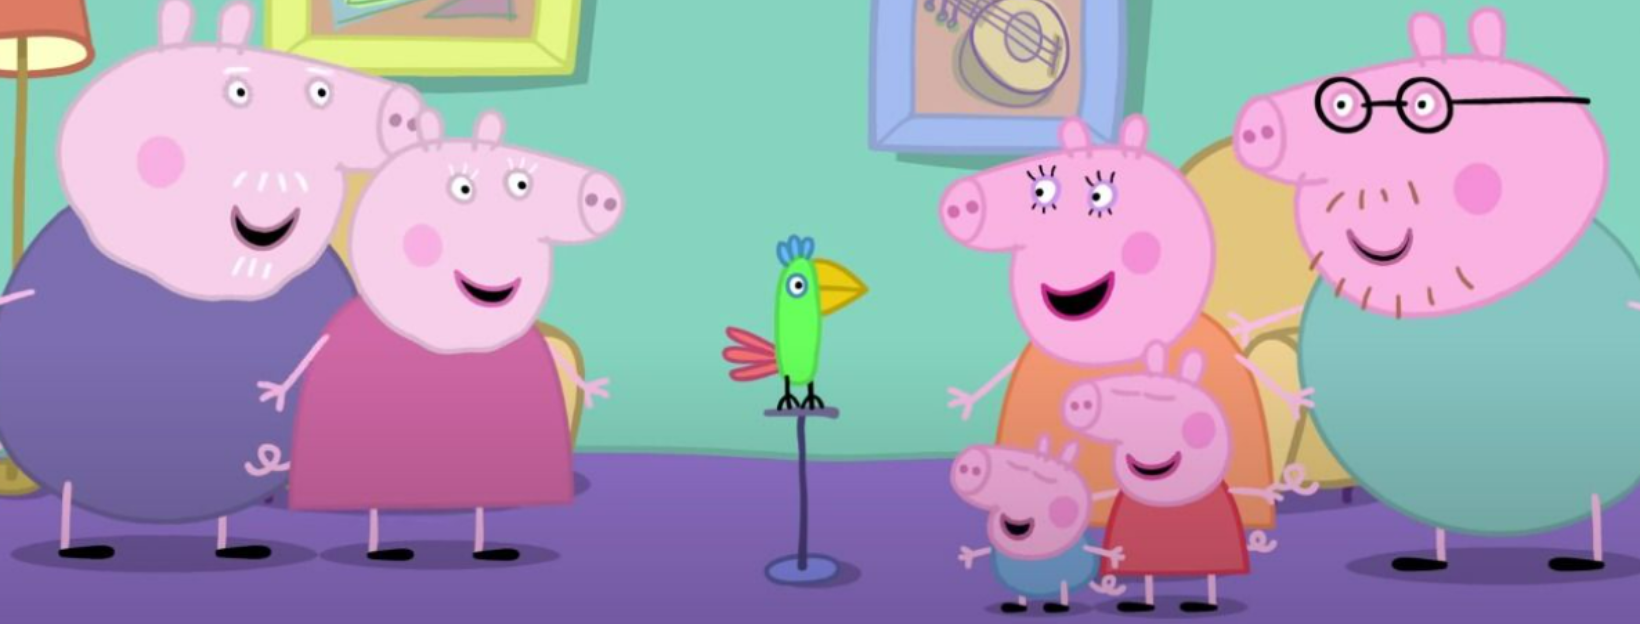 Oink! Oink! Meet Peppa Pig’s Loud, Funny Yet Adorable Family